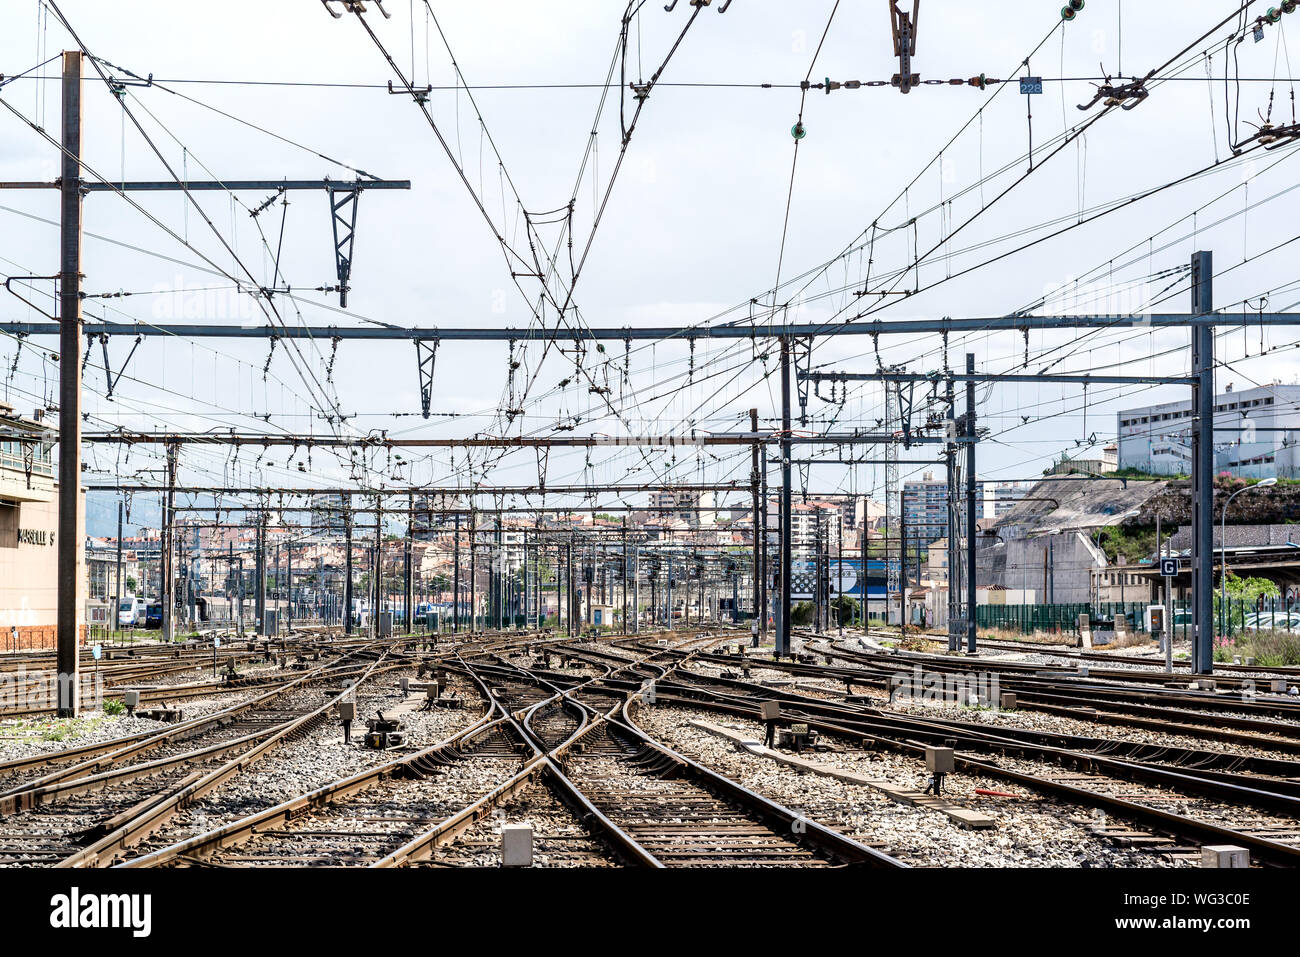 Railroad Junctions Against Sky At Gare De Marseille-saint-charles Stock Photo